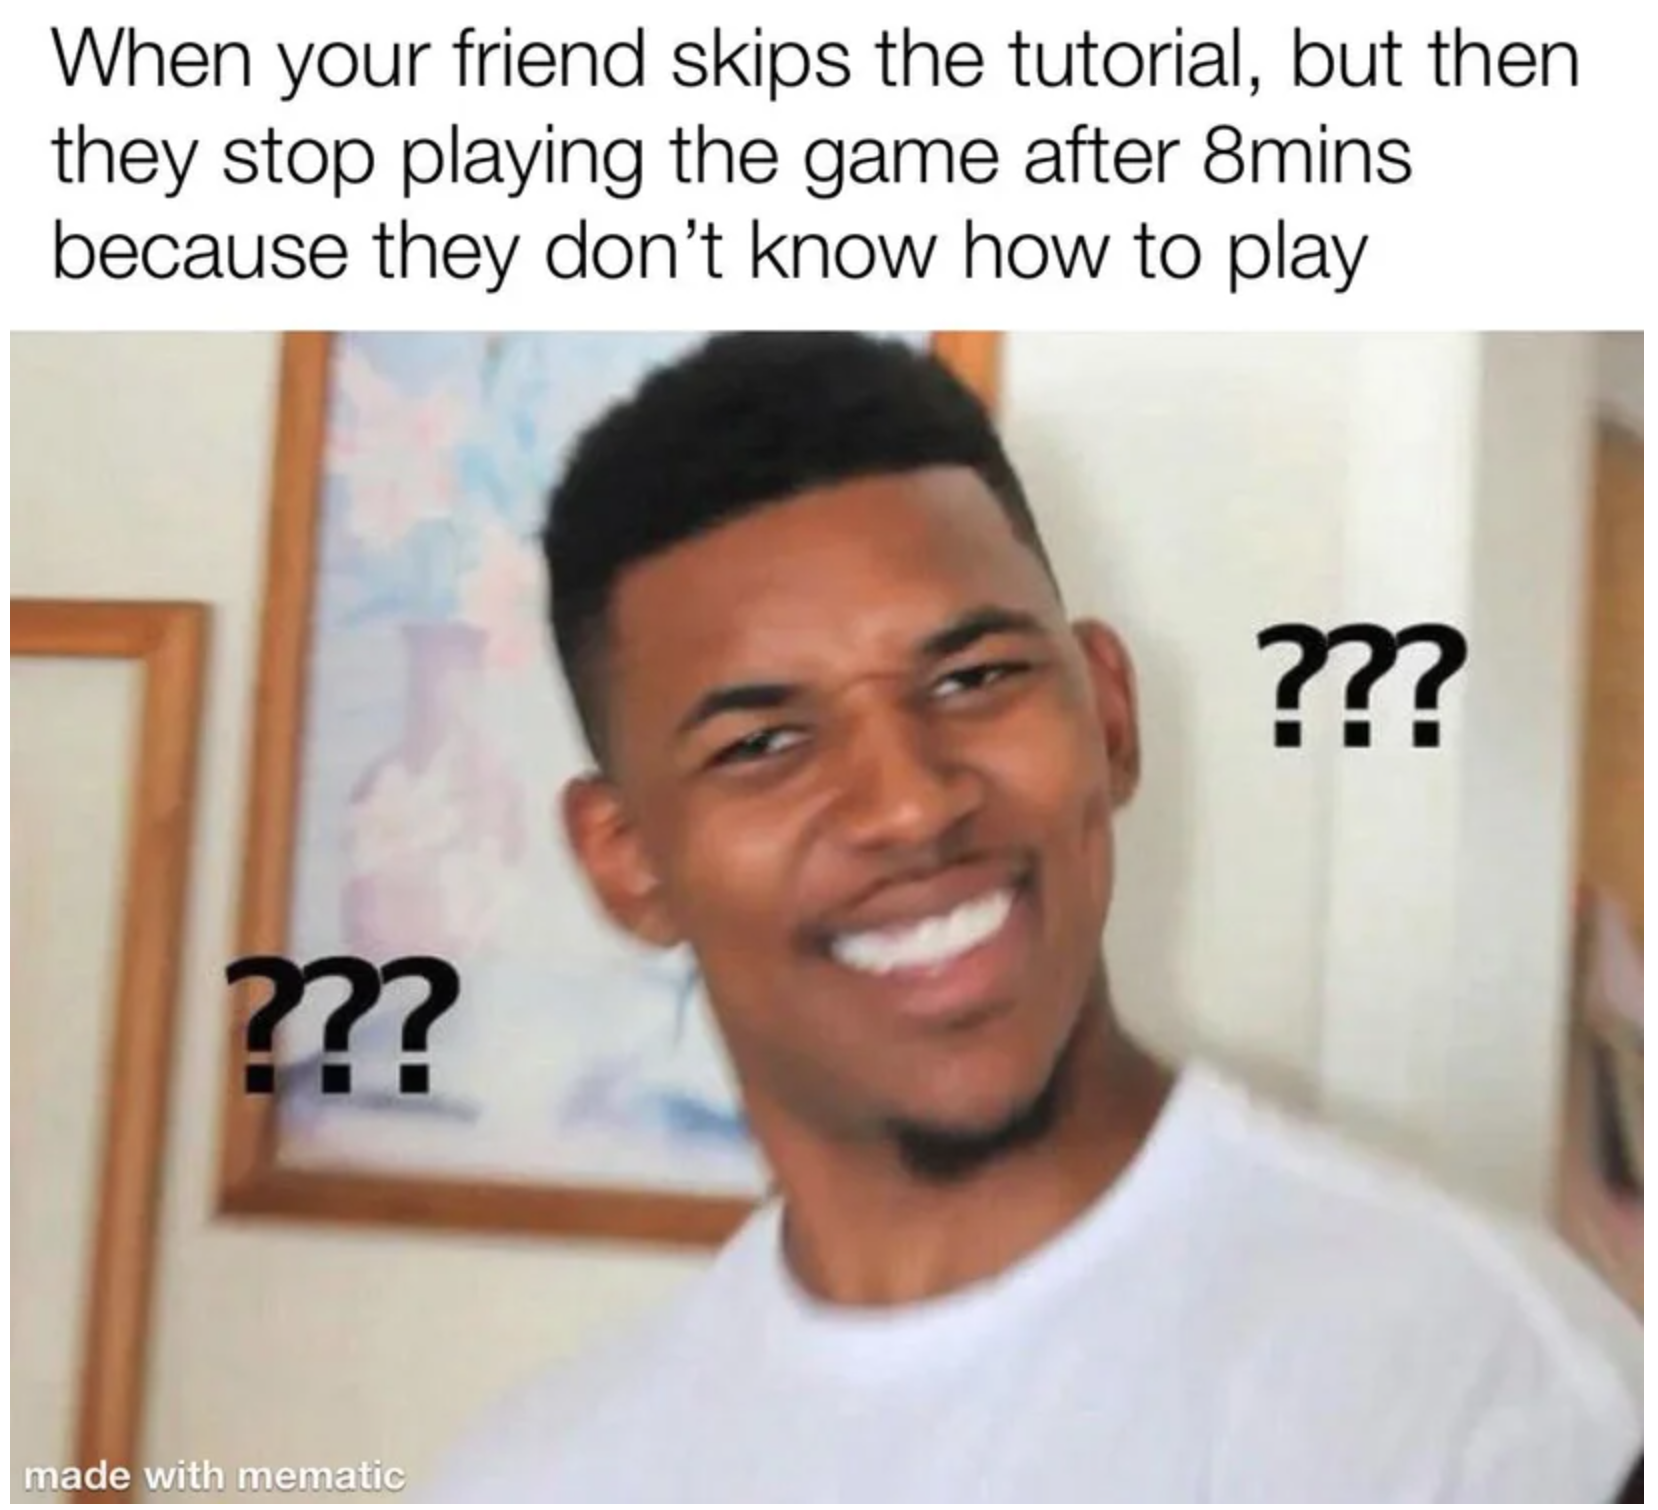 funny gaming memes - minecraft memes roast - When your friend skips the tutorial, but then they stop playing the game after 8mins because they don't know how to play ??? made with mematic